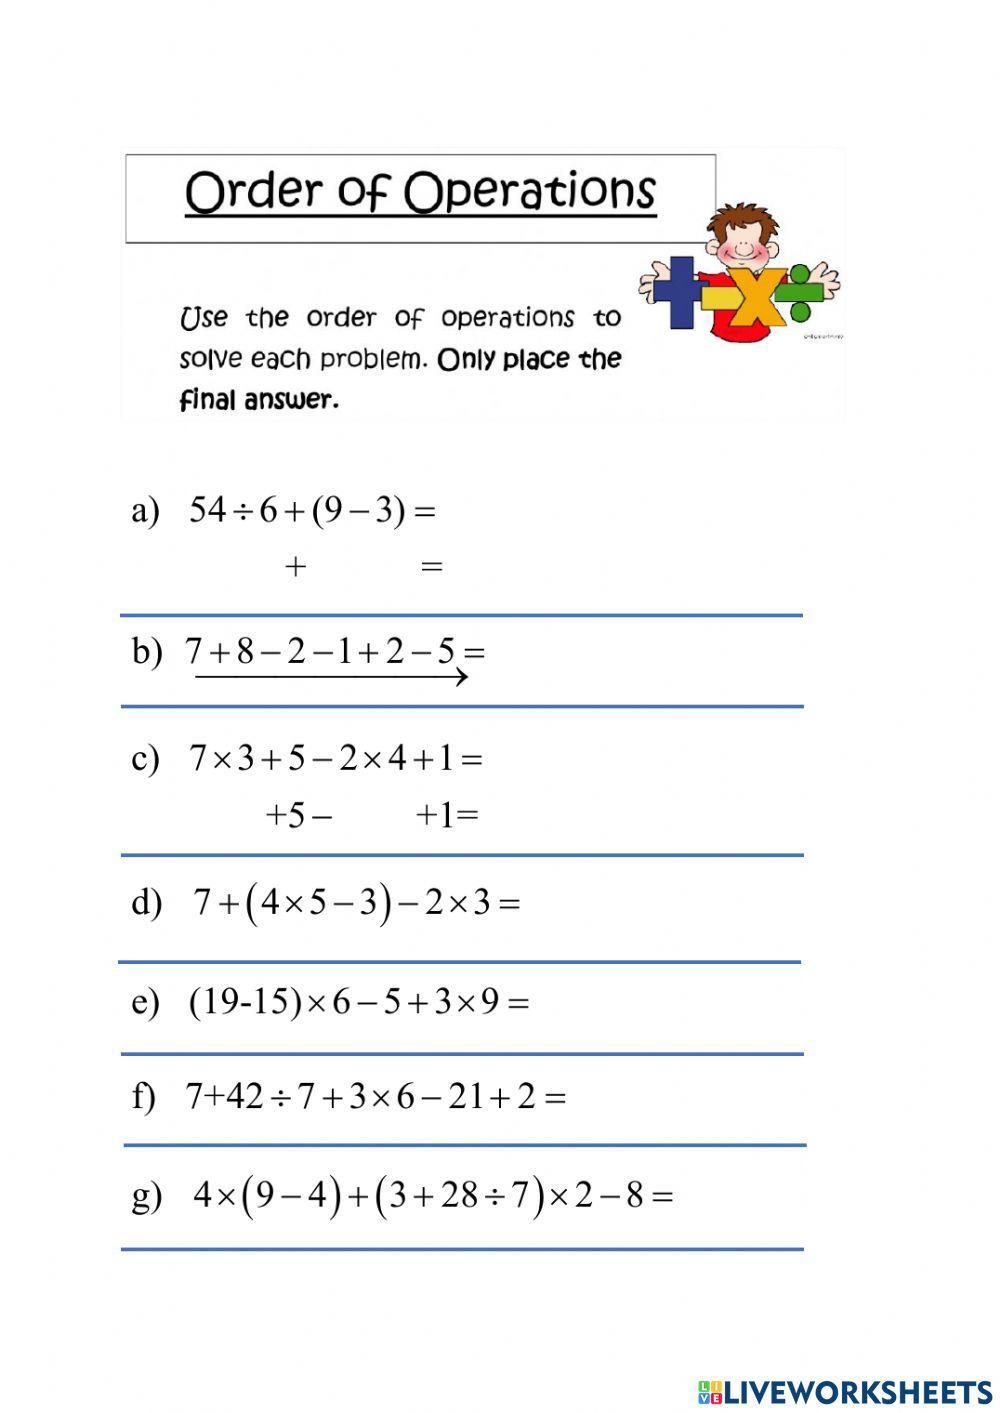 Order of operations 02